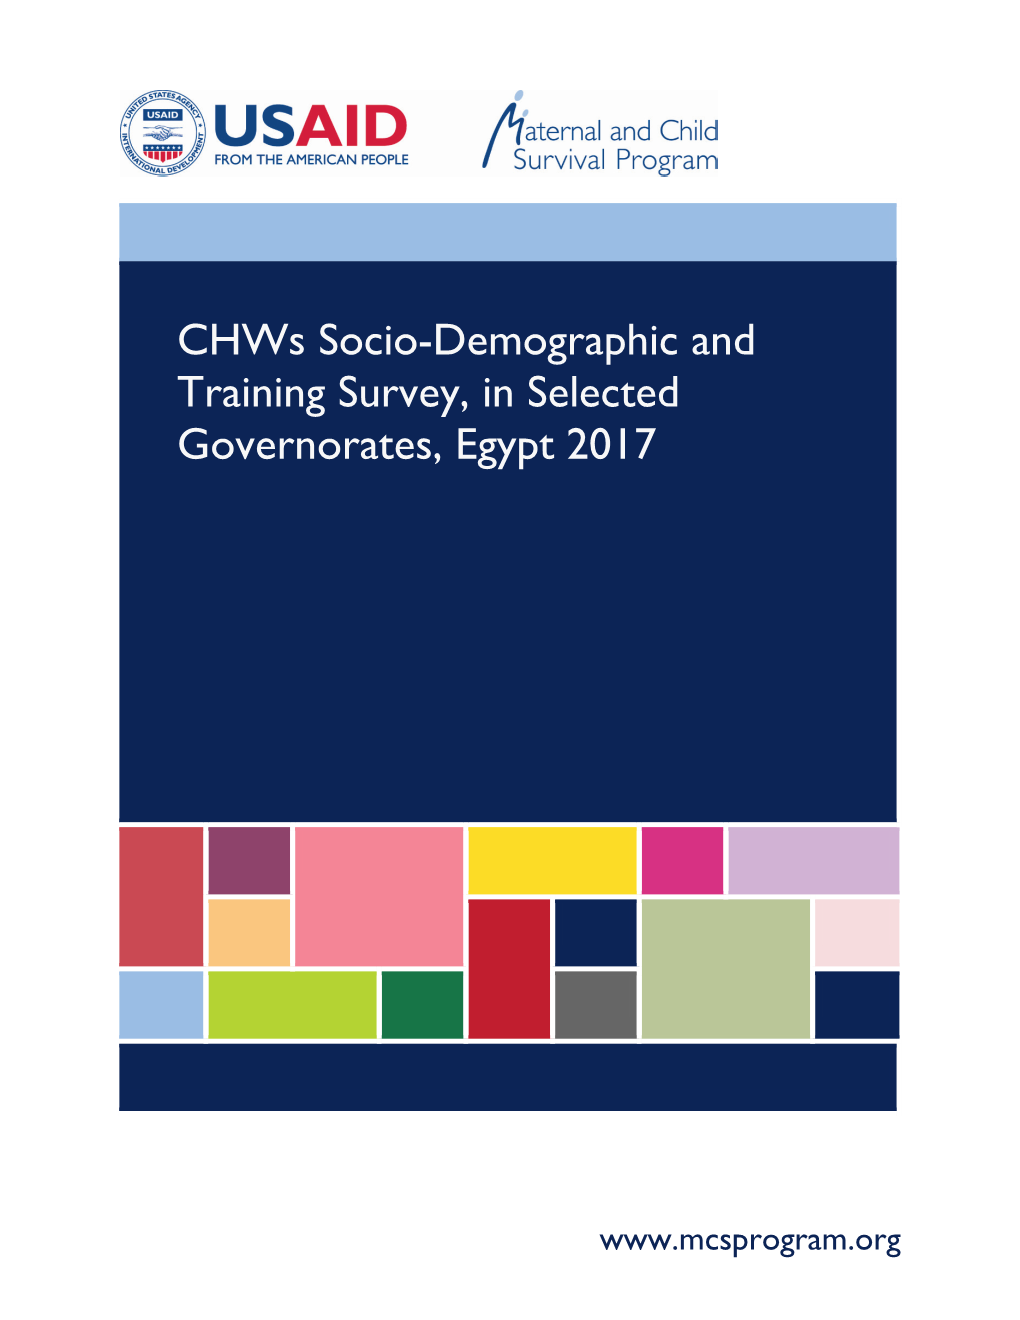 Chws Socio-Demographic and Training Survey, in Selected Governorates, Egypt 2017